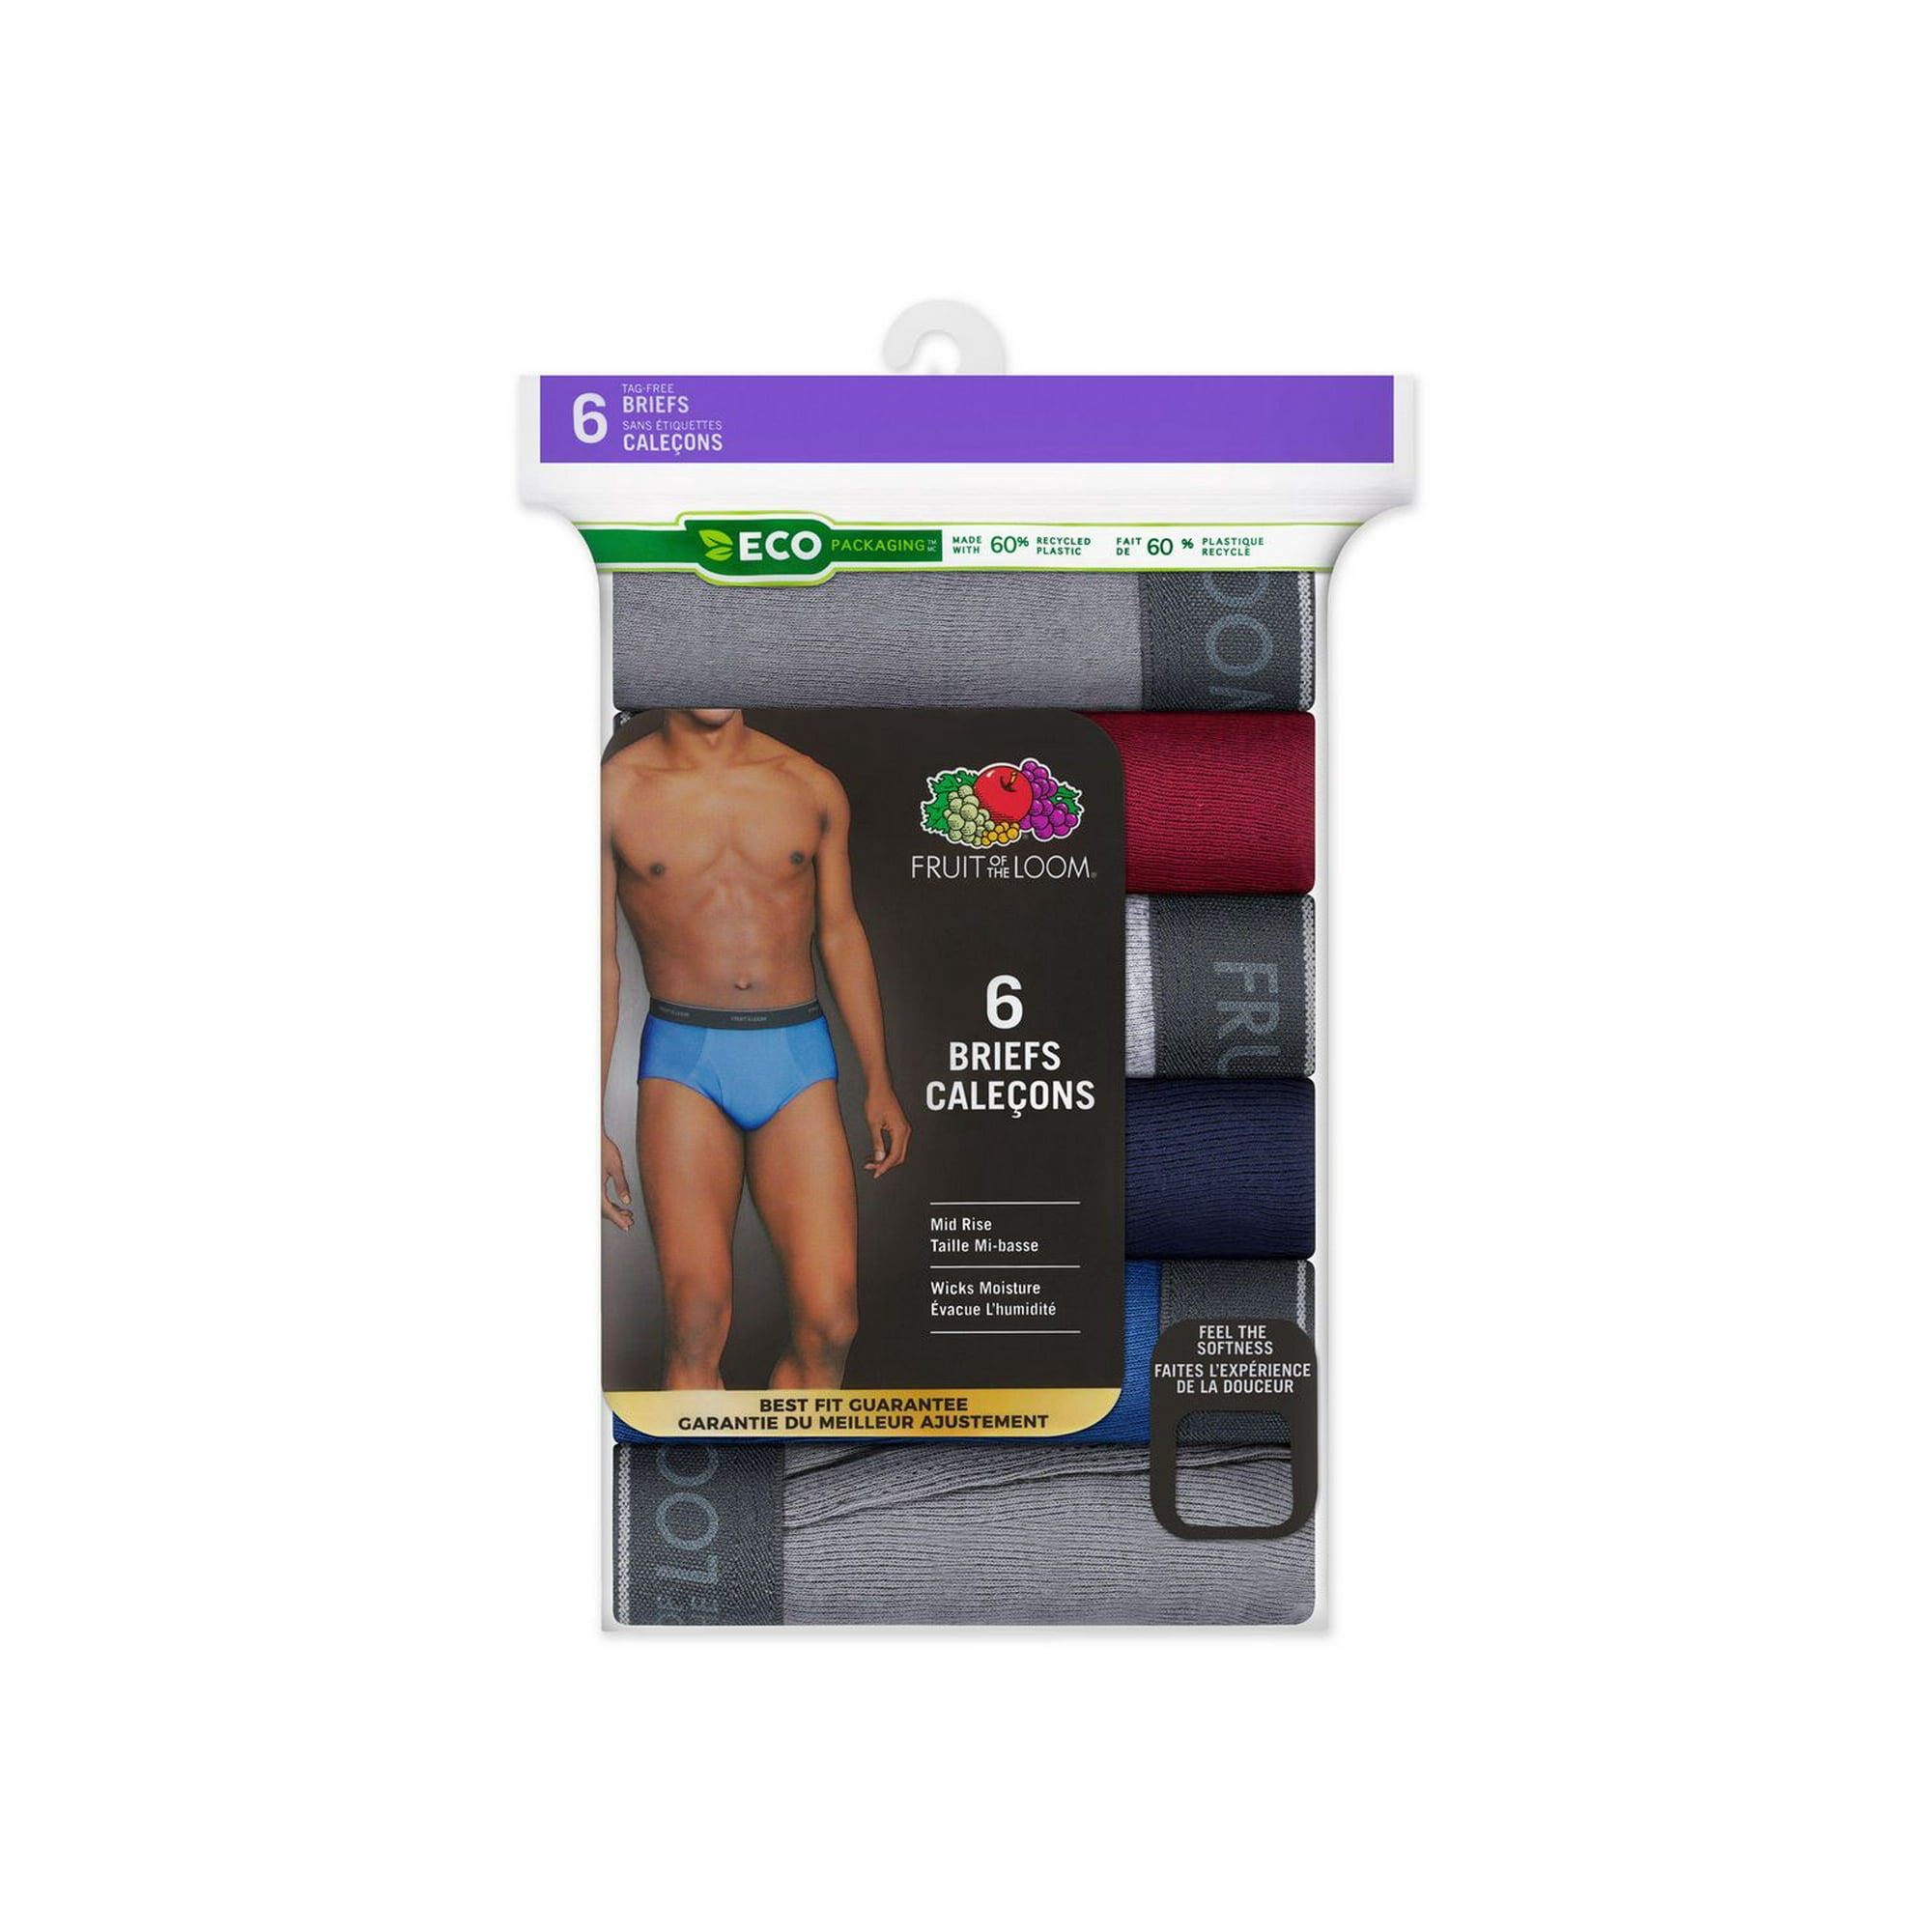 Stanfields Men's Premium Modern Fit Brief - 2 Pack – Take It Outside